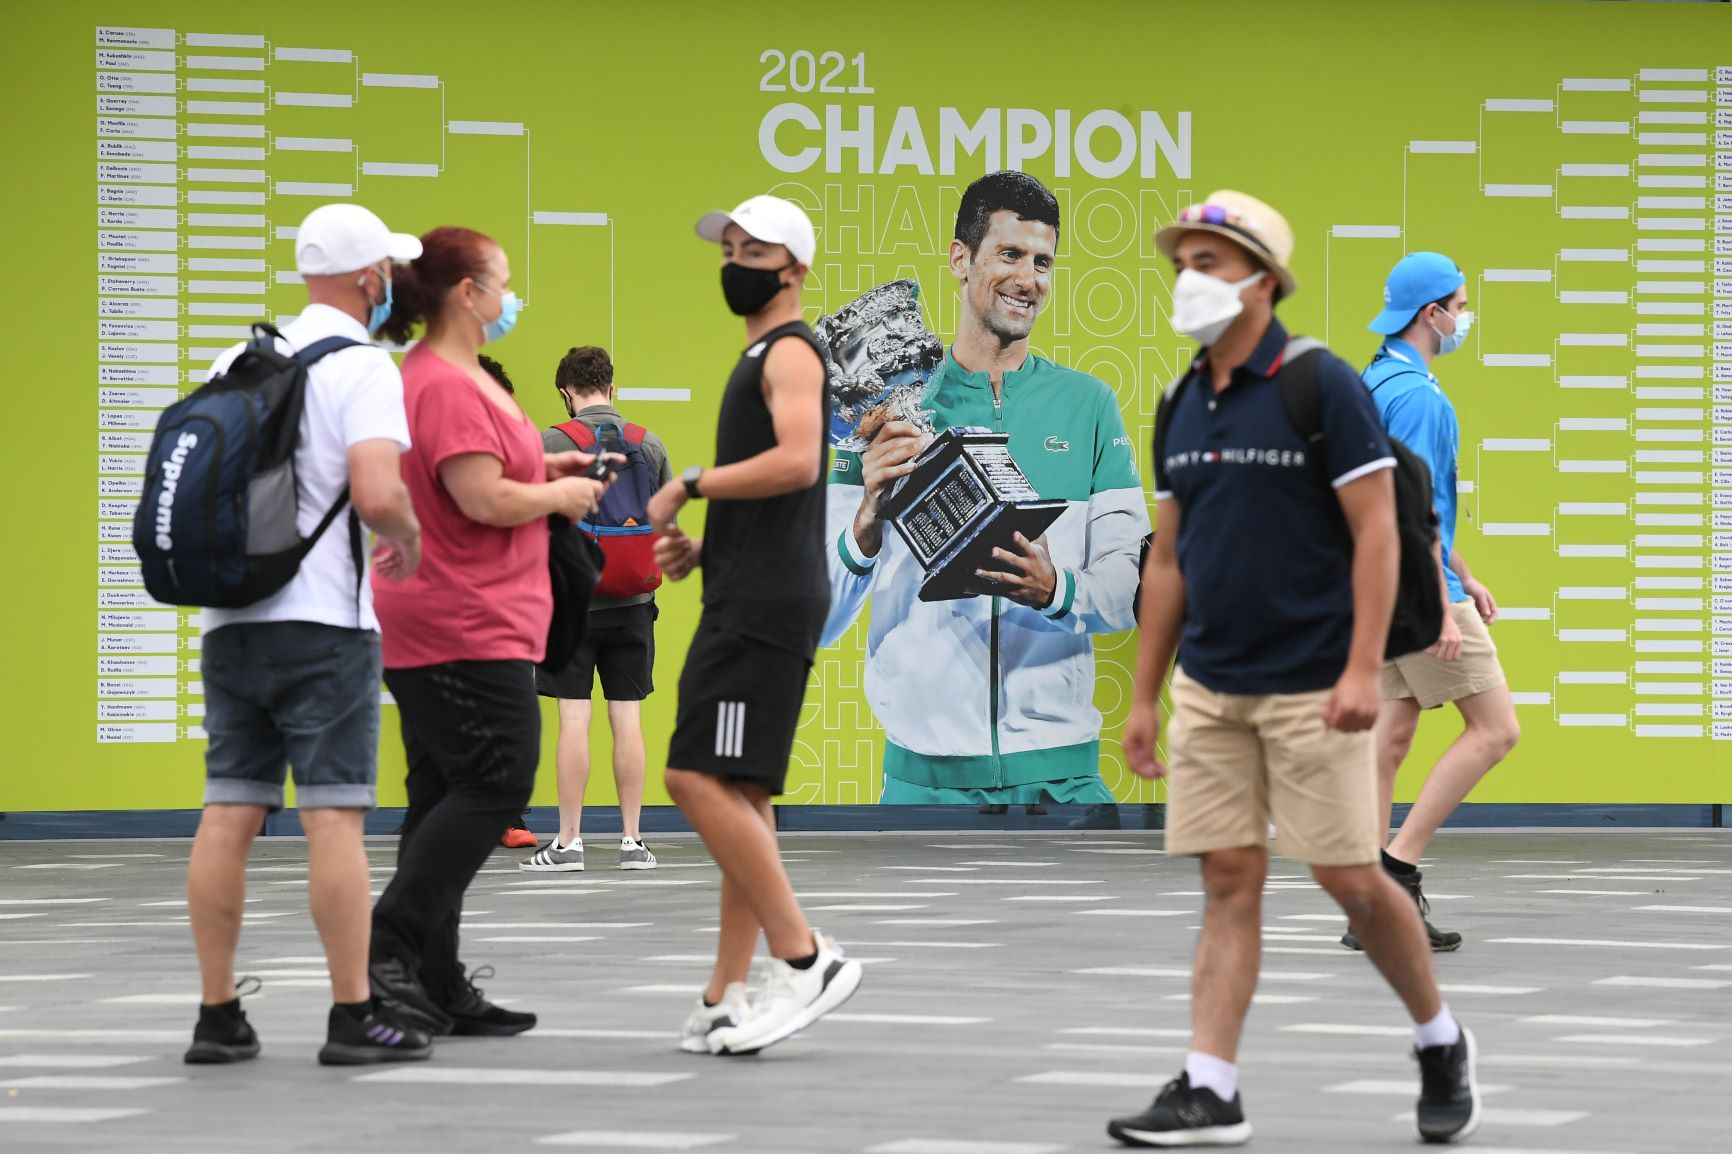 Spectators are seen walking past a picture of Novak Djokovic on Day 1 of the Australian Open Tennis Tournament at Melbourne Park